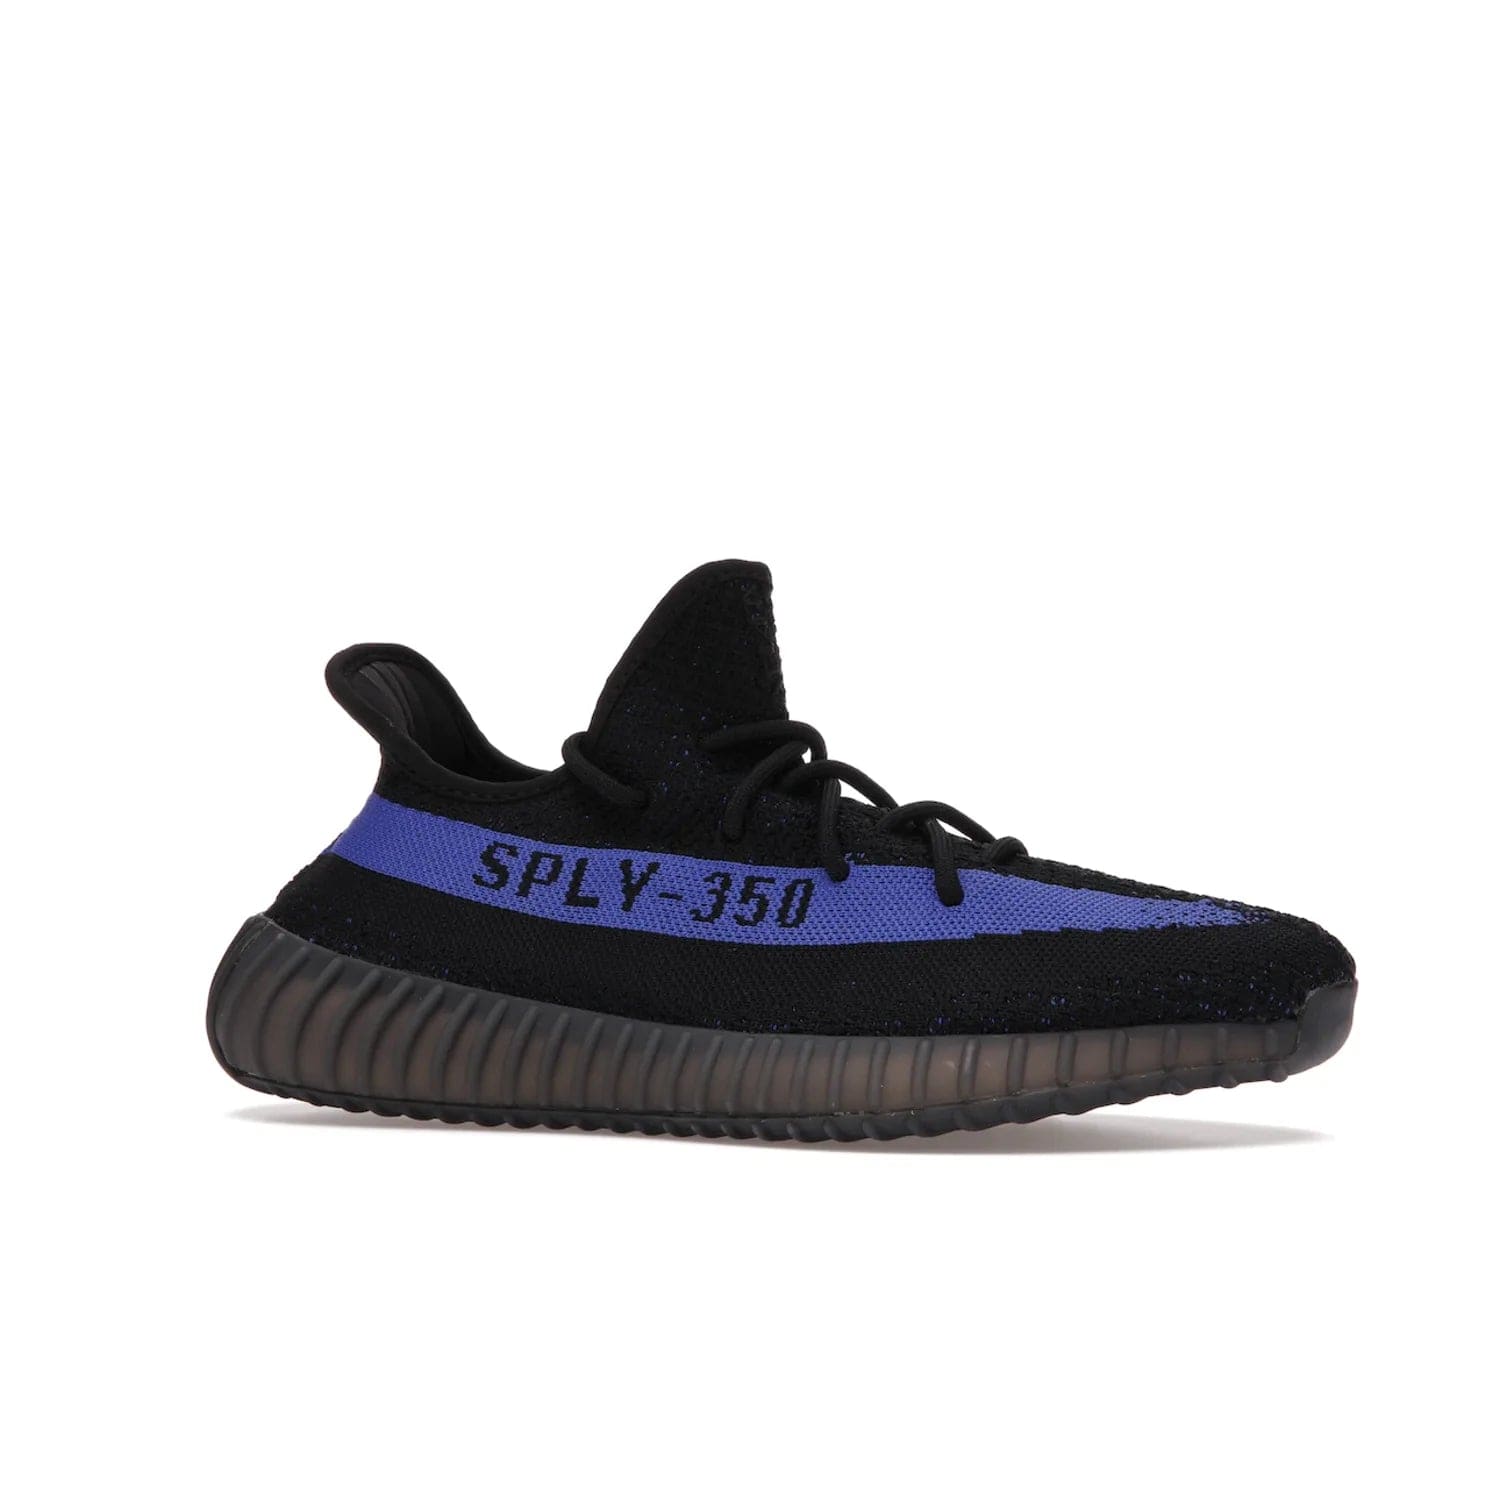 adidas Yeezy Boost 350 V2 Dazzling Blue - Image 3 - Only at www.BallersClubKickz.com - Shop the Adidas Yeezy 350 V2 Dazzling Blue, featuring a solid black Primeknit upper, Dazzling Blue side stripe, “SPLY-350” text, and a muted Boost sole. Releasing Feb 2022, this style is perfect for any shoe fan.